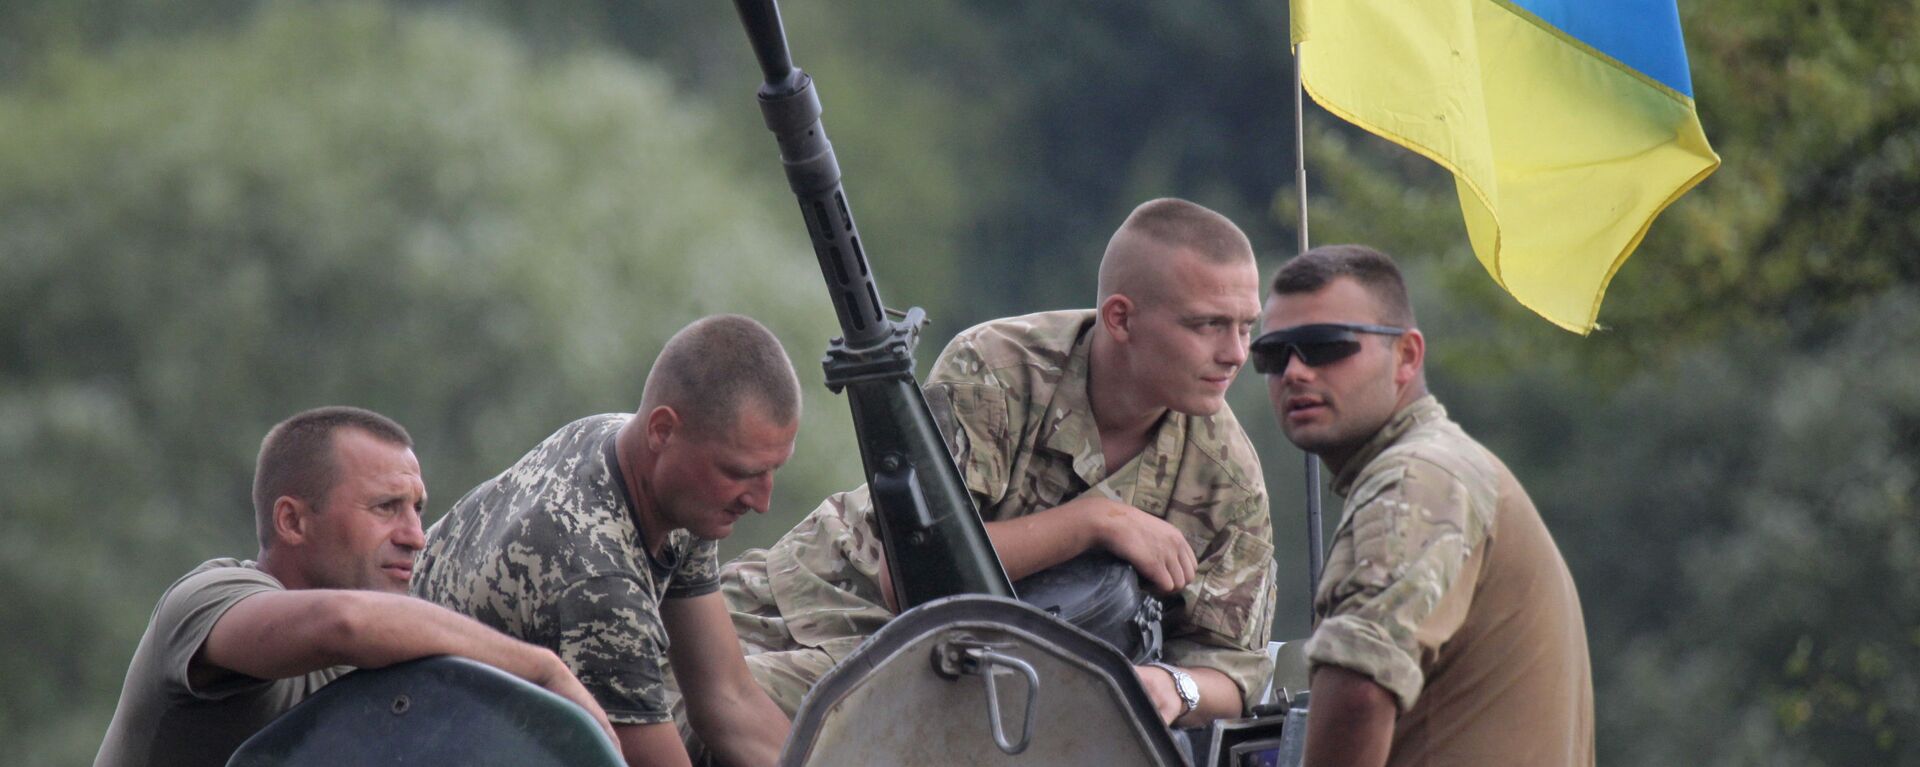 Ukrainian soldiers atop an APC watch training exercises under the supervision of British instructors on the military base outside Zhitomir, Ukraine, Tuesday, Aug. 11, 2015 - Sputnik International, 1920, 10.05.2022